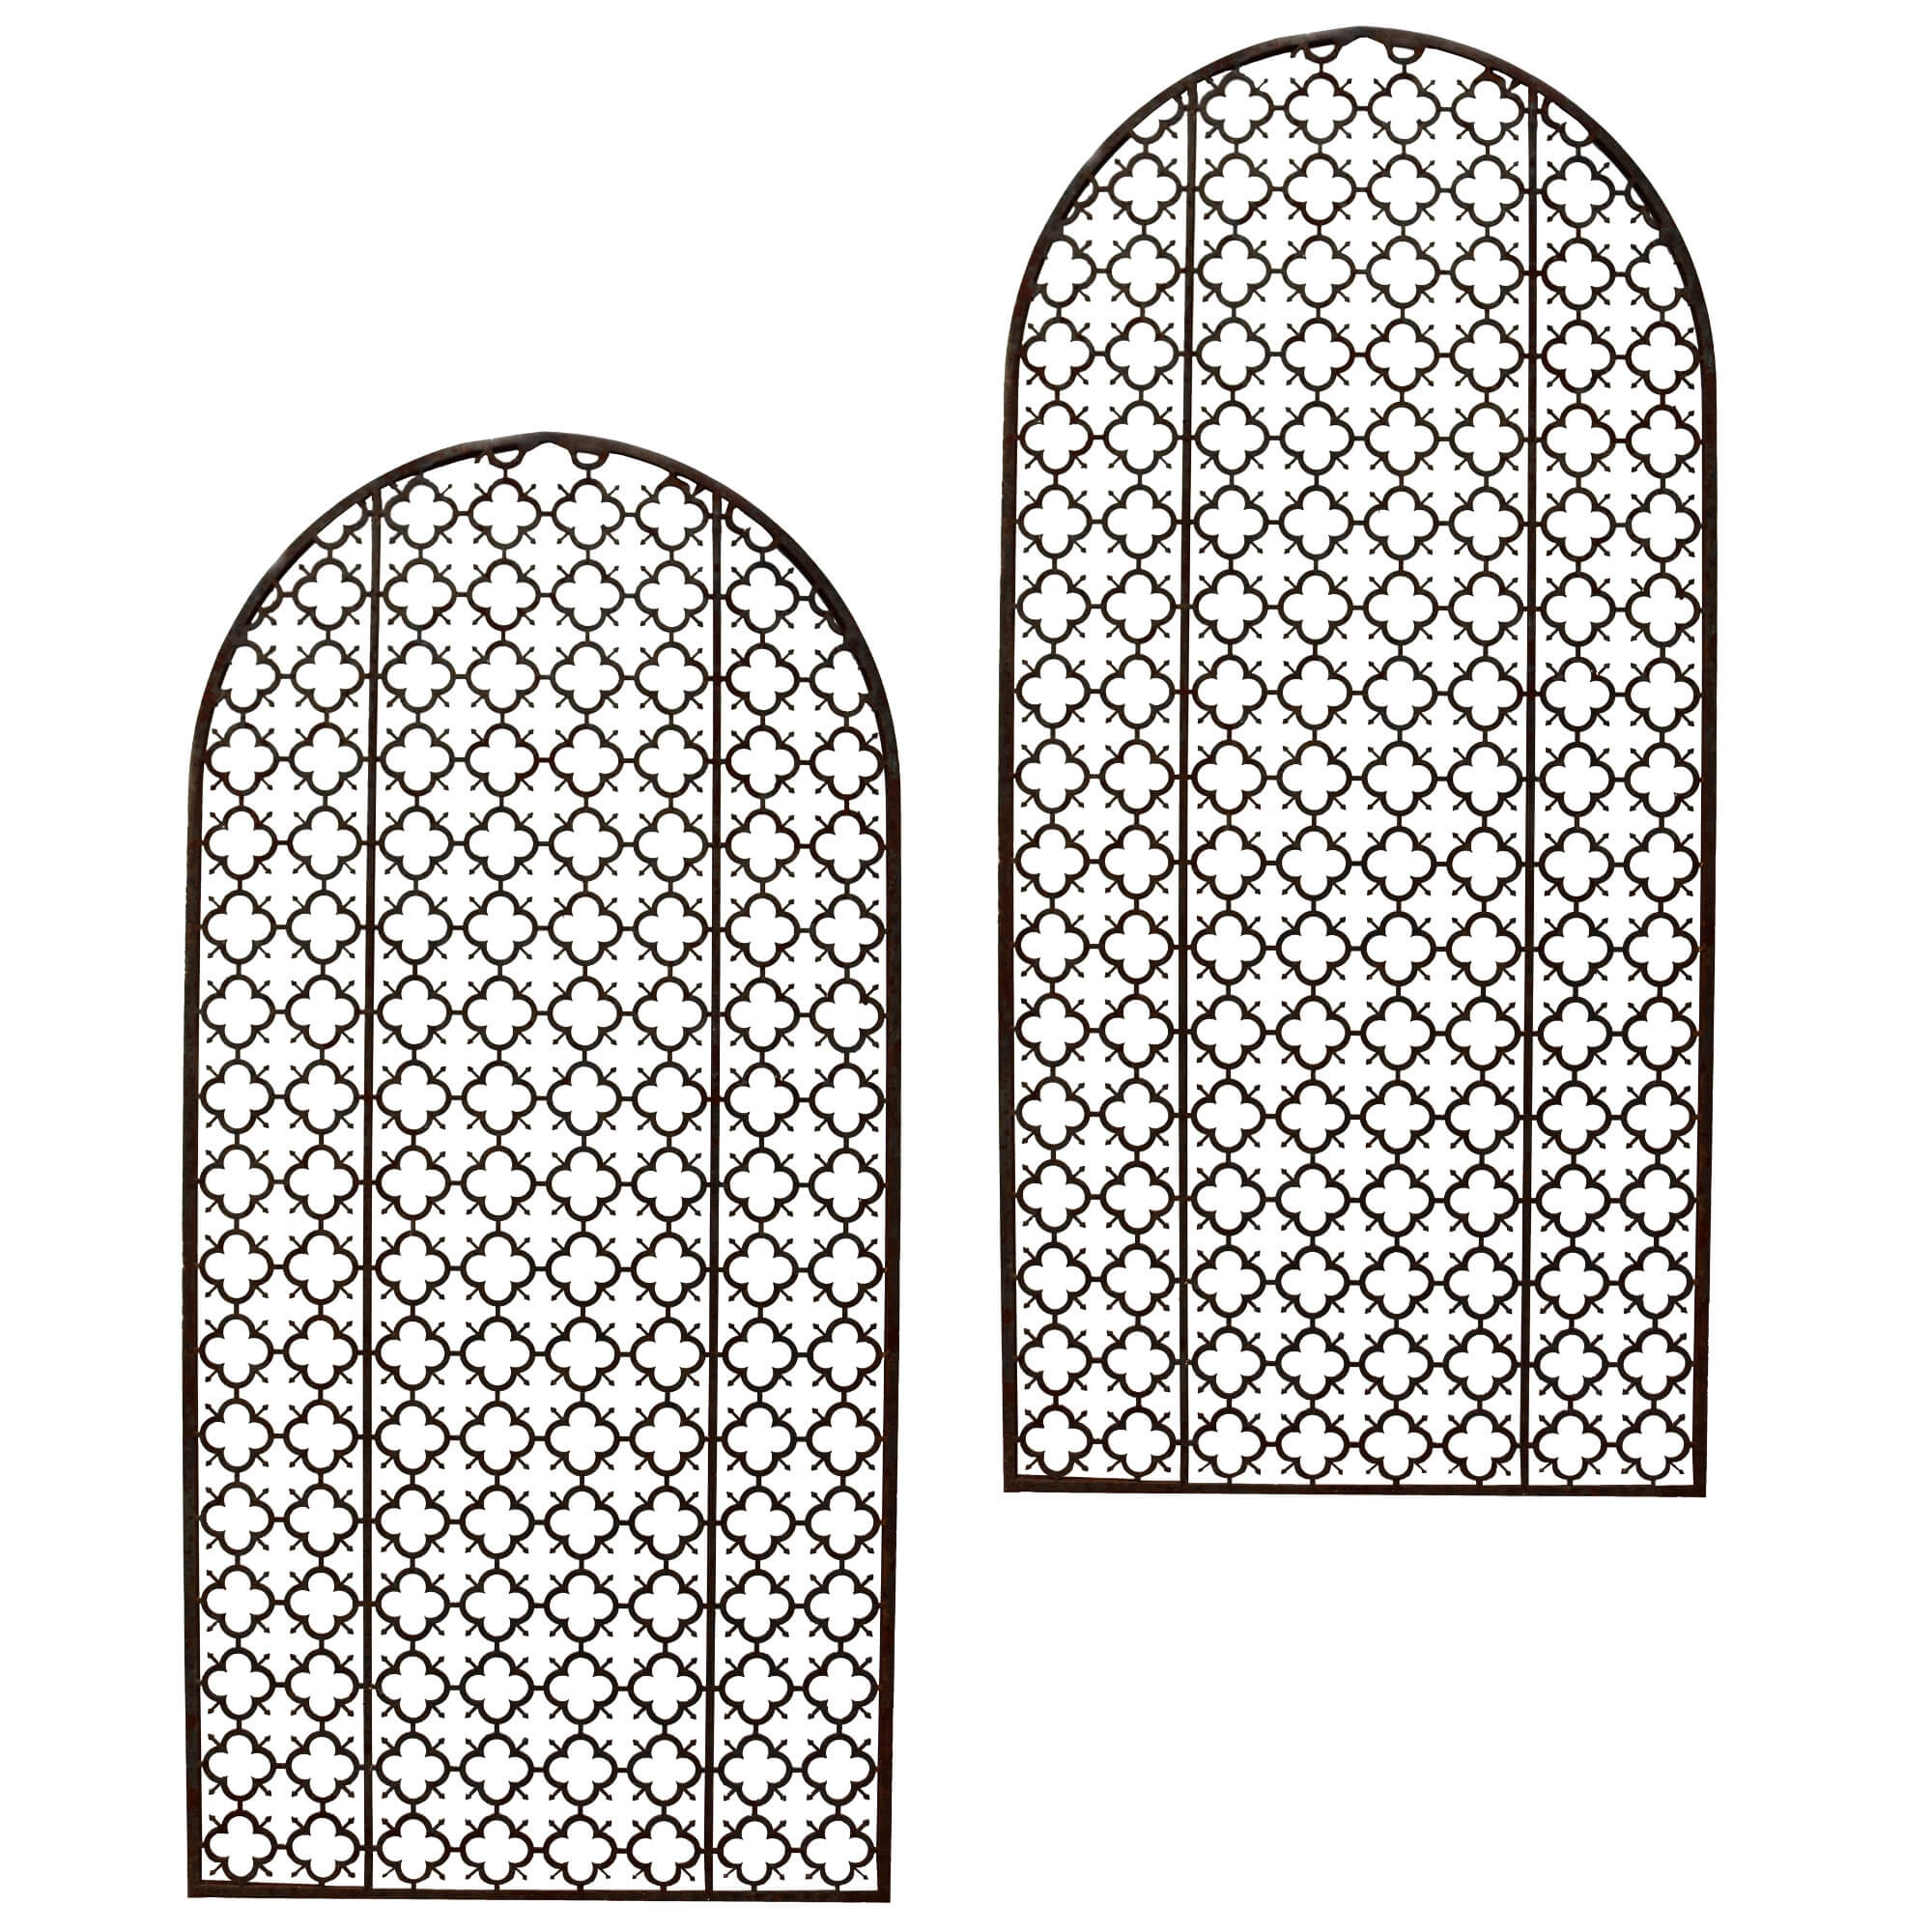 Pair of Large Arched Reclaimed Steel Garden Trellis Panels